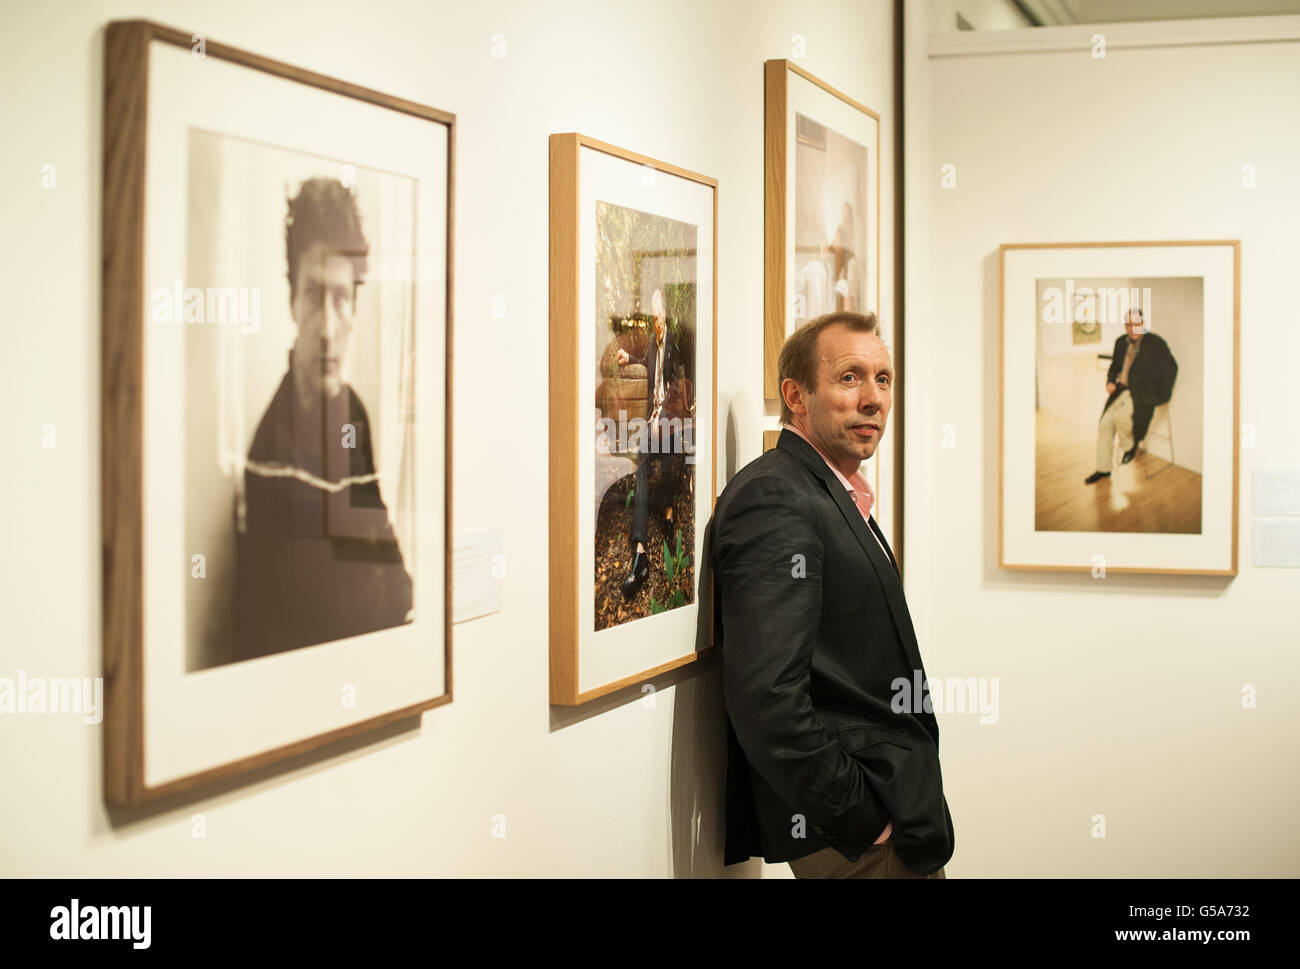 Photographer David Dawson poses with works from 'An Artist's Life: Photographs of Lucian Freud by Cecil Beaton and David Dawson', which is on display at Sotheby's, in London, from 10 July to 11 August 2012. Stock Photo